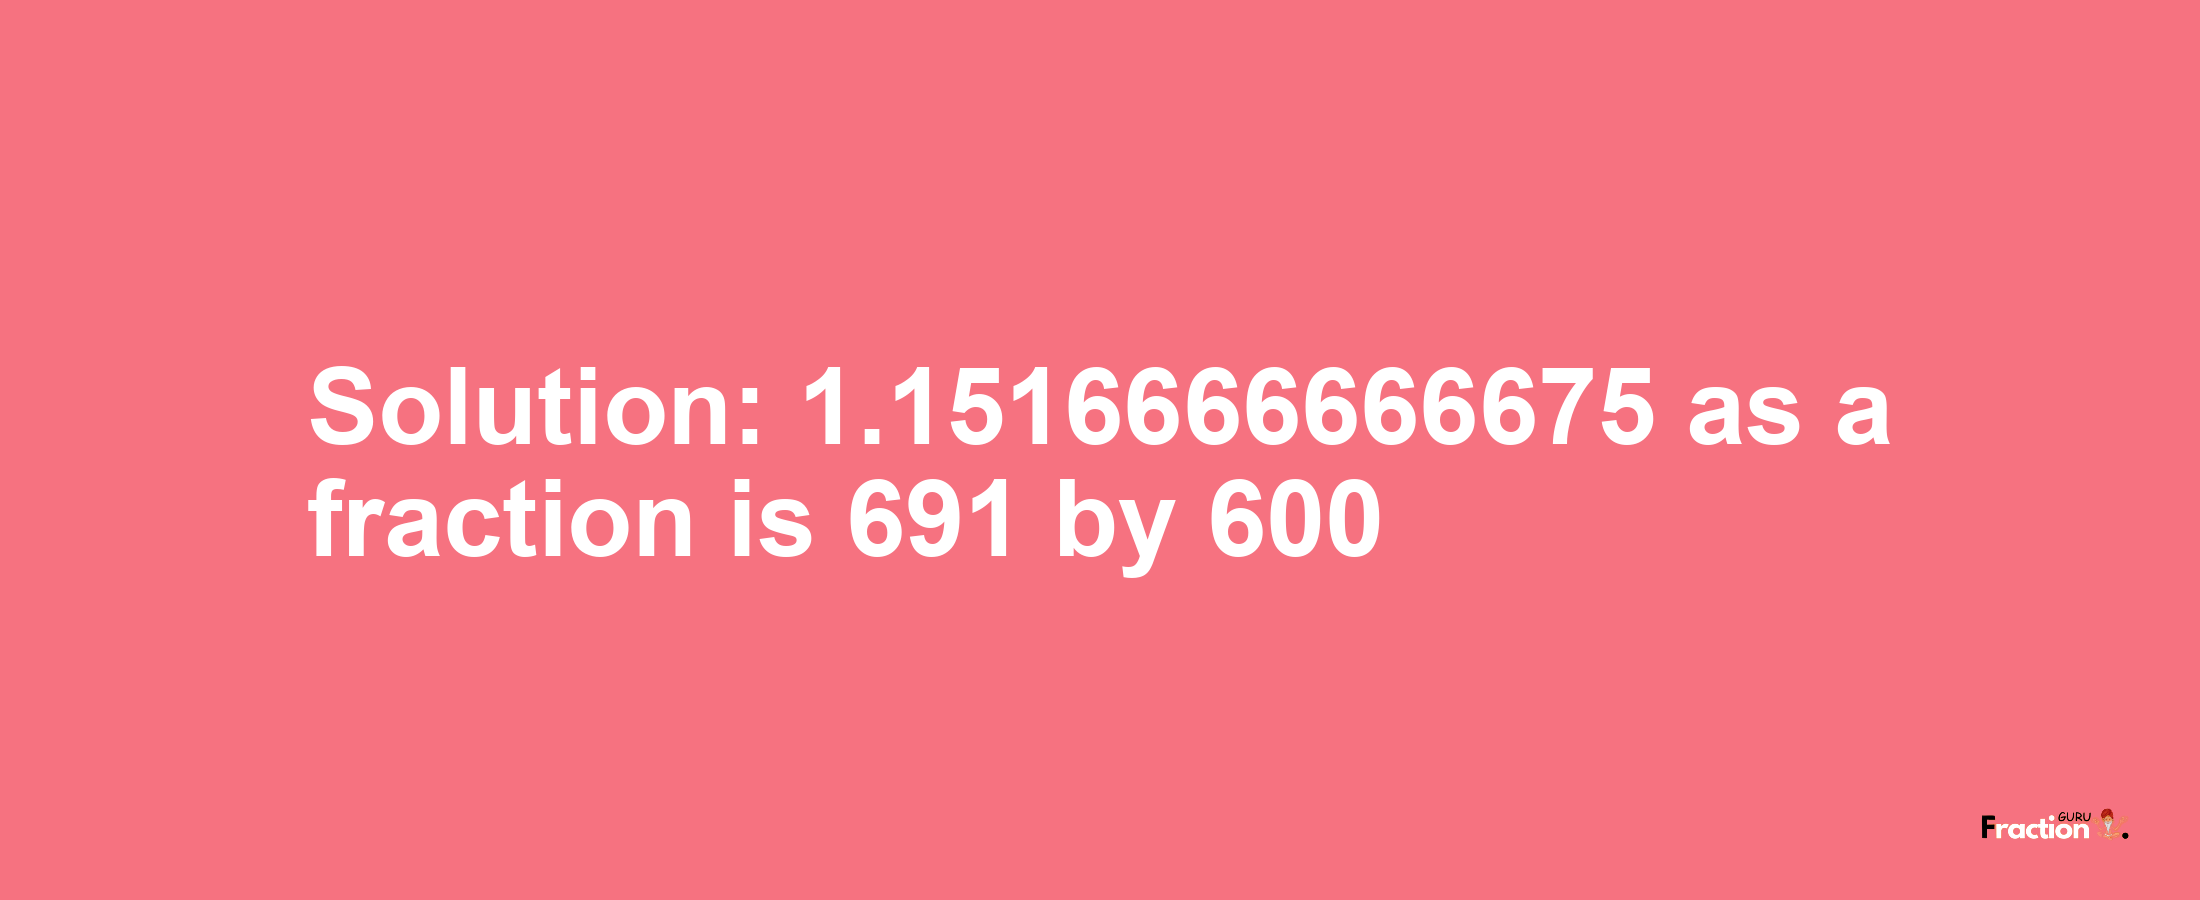 Solution:1.1516666666675 as a fraction is 691/600